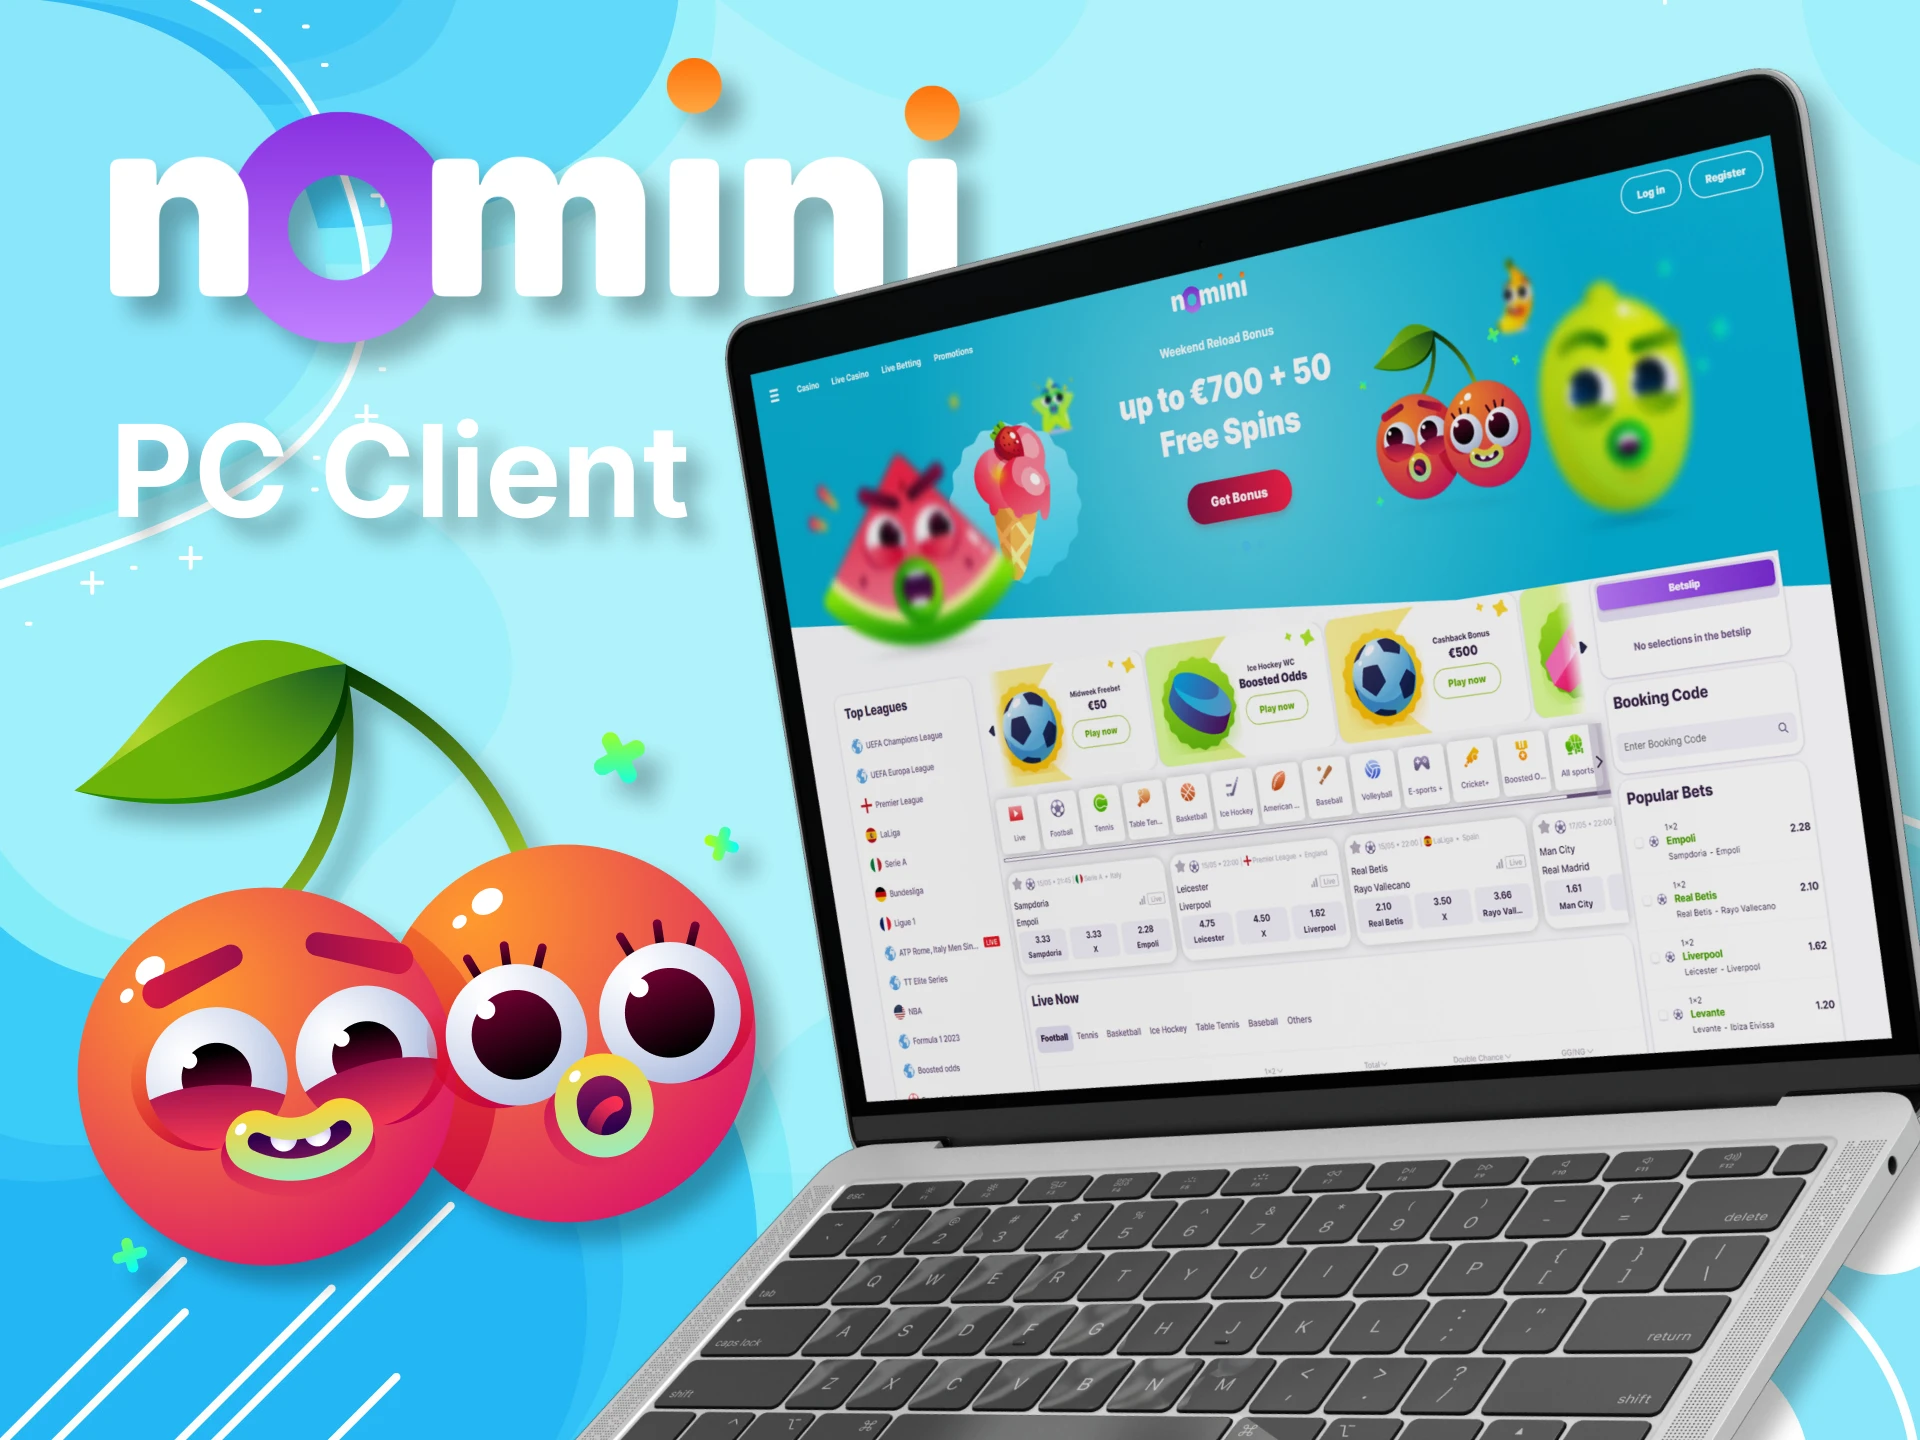 Play casinos and bet on sports on your personal computer with Nomini.